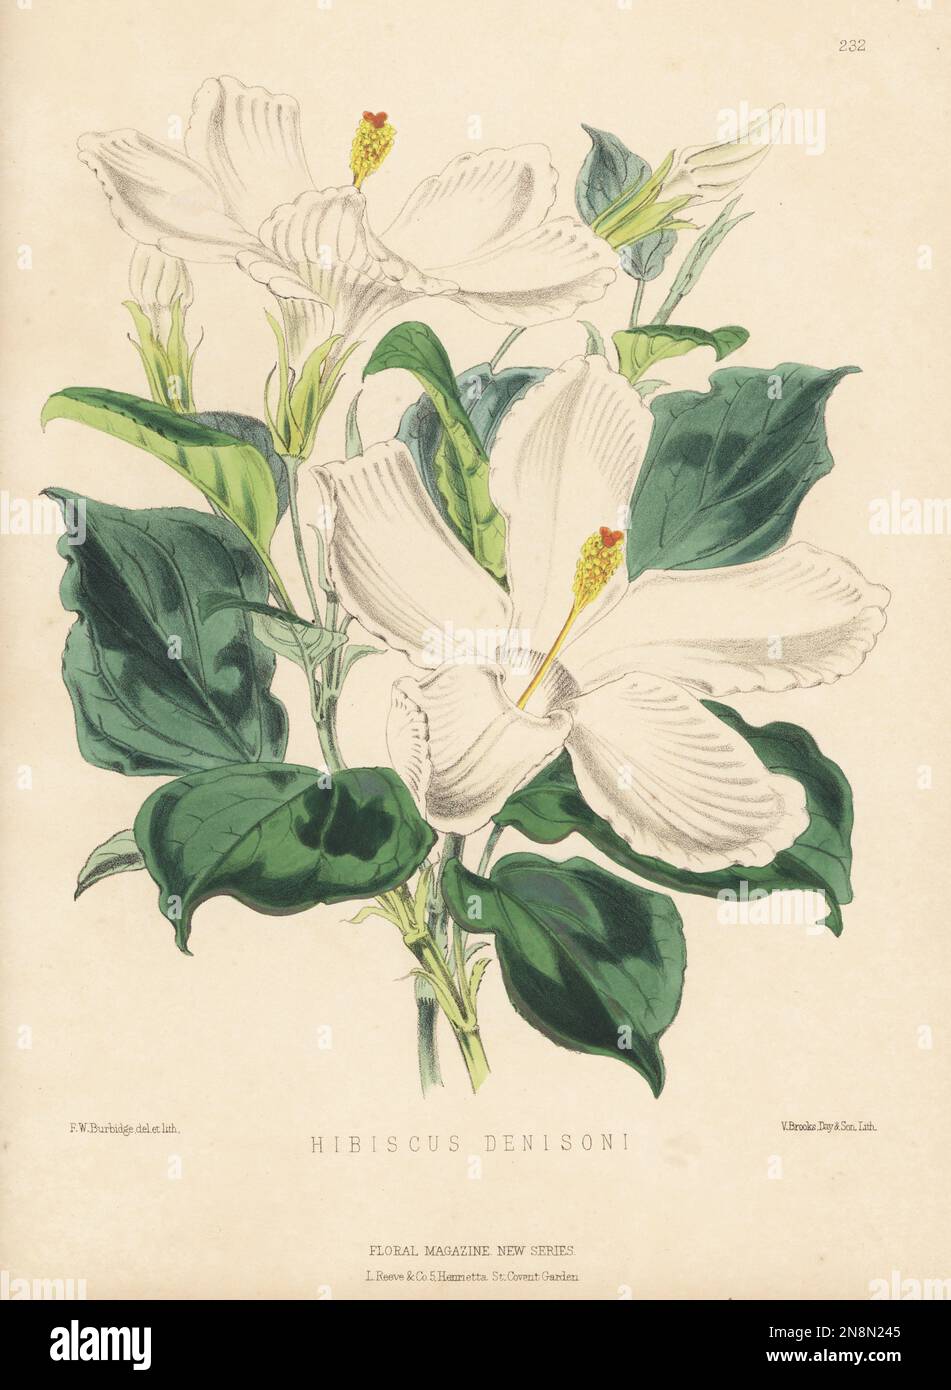 Mysterious hibiscus or lilibiscus species, Hibiscus denisoni. Pink flowers fade to white during the day. Named for William Denison, governor of New South Wales, imported from Australia by Bernard Samuel Williams of Victoria and Paradise Nurseries, Upper Holloway. Handcolored botanical illustration drawn and lithographed by Frederick William Burbidge from Henry Honywood Dombrain's Floral Magazine, New Series, Volume 5, L. Reeve, London, 1876. Lithograph printed by Vincent Brooks, Day & Son. Stock Photo